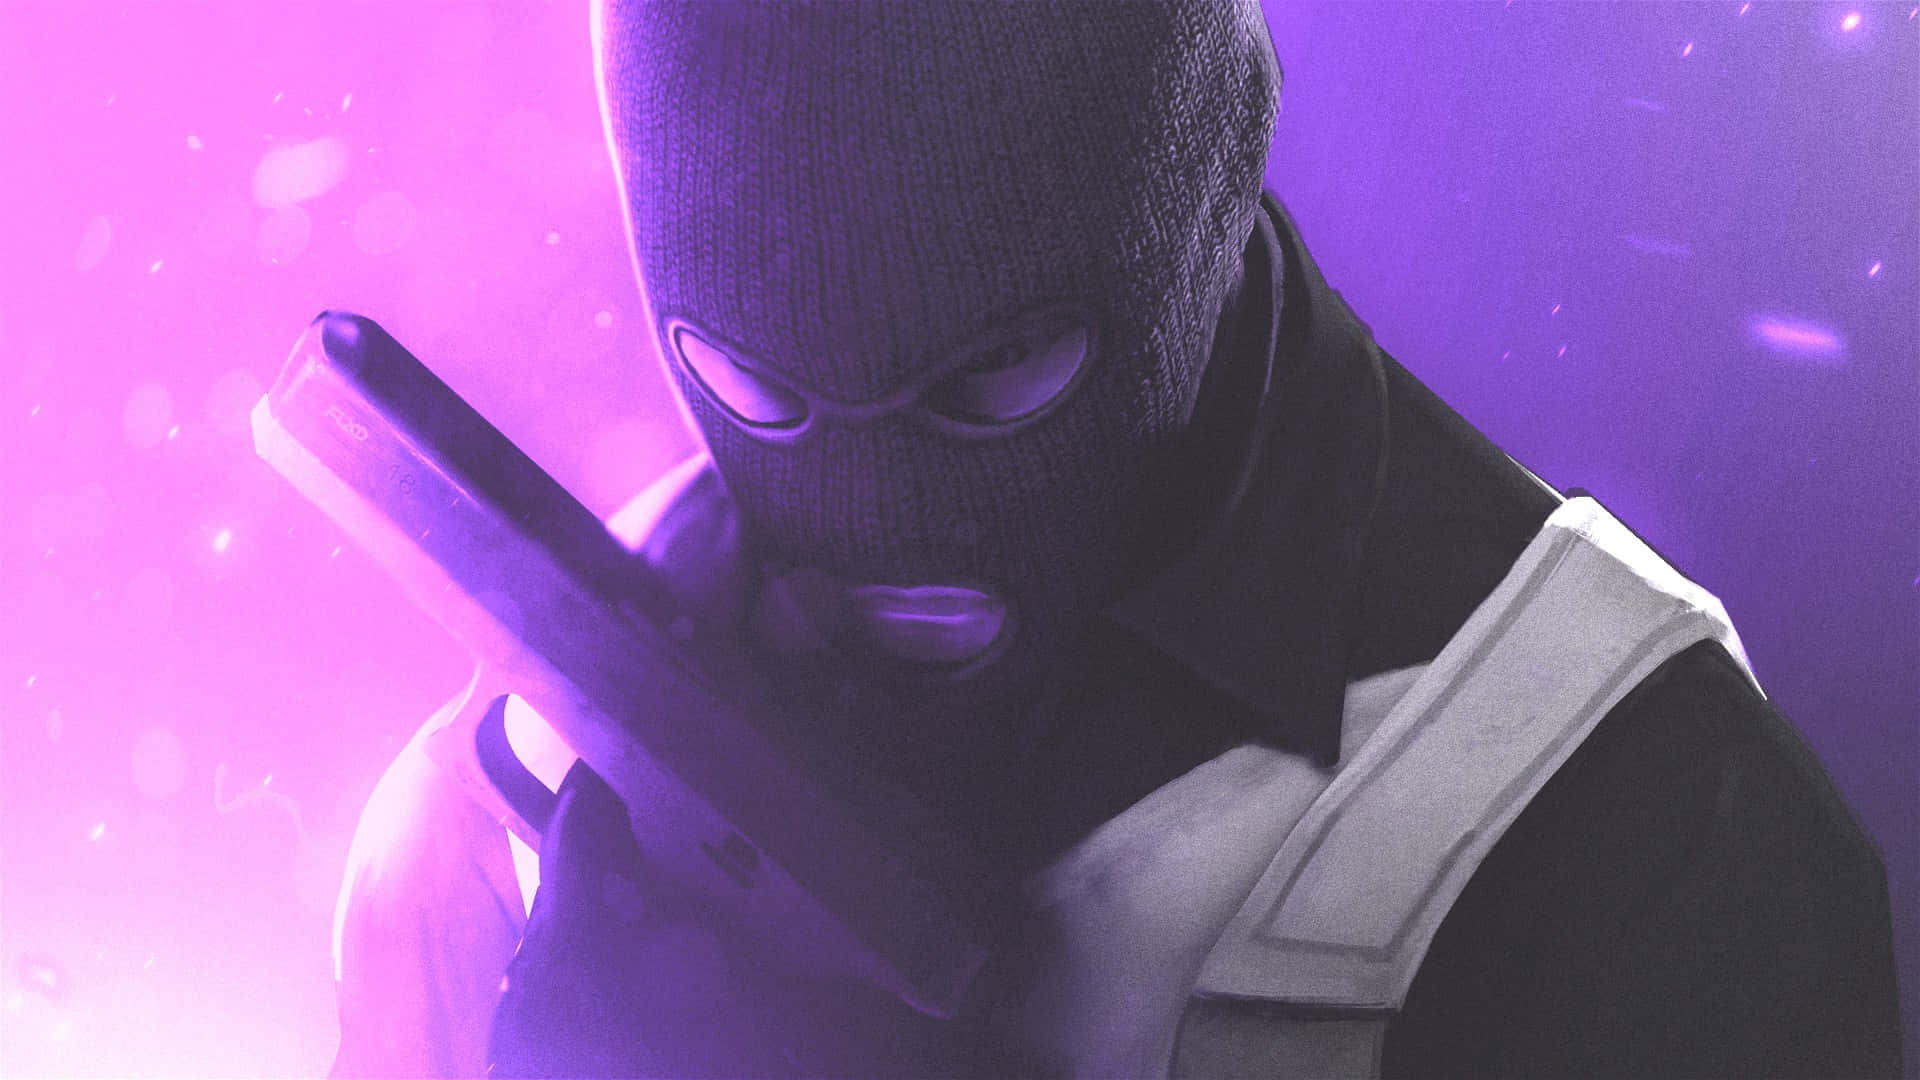 Pink And Purple 1080p Counter Strike Global Offensive Background